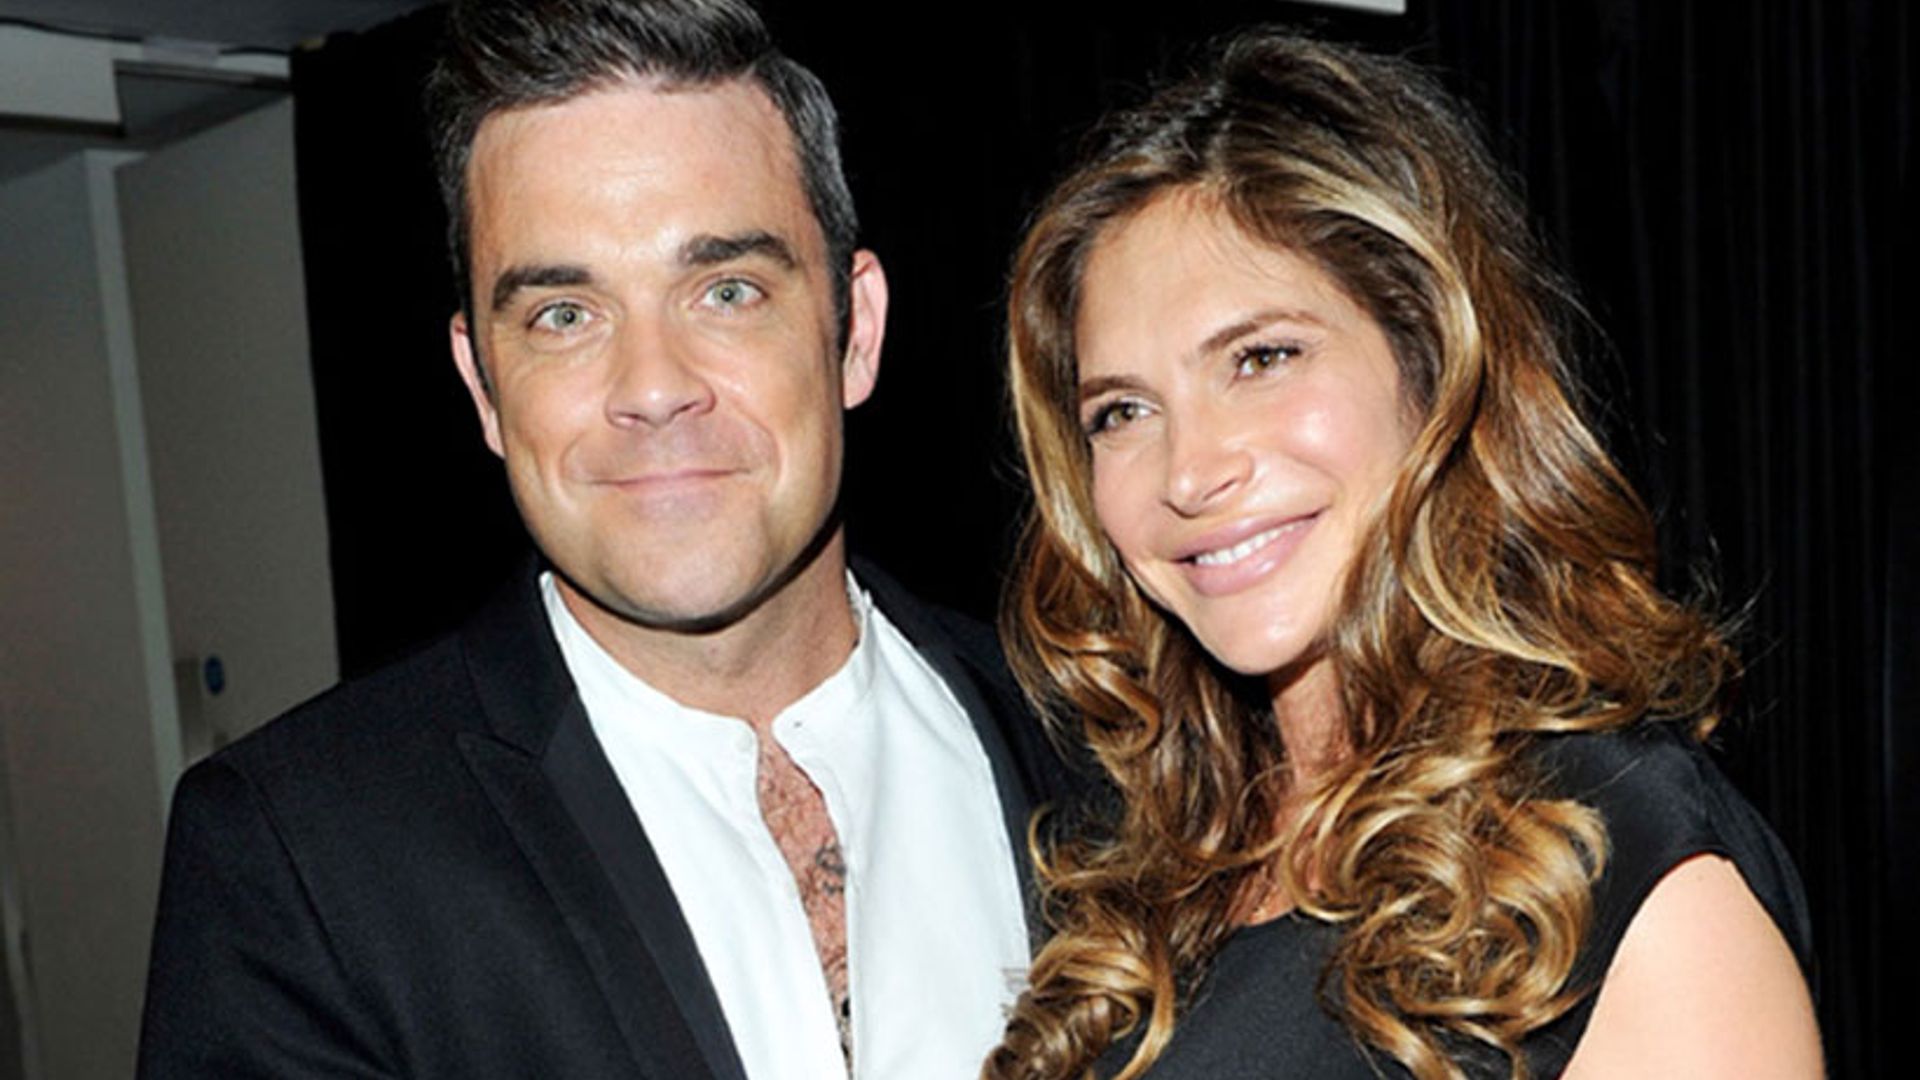 Ayda Field and Robbie Williams' daughter Teddy has fun in the sun in adorable holiday snap - take a look! - hellomagazine.com